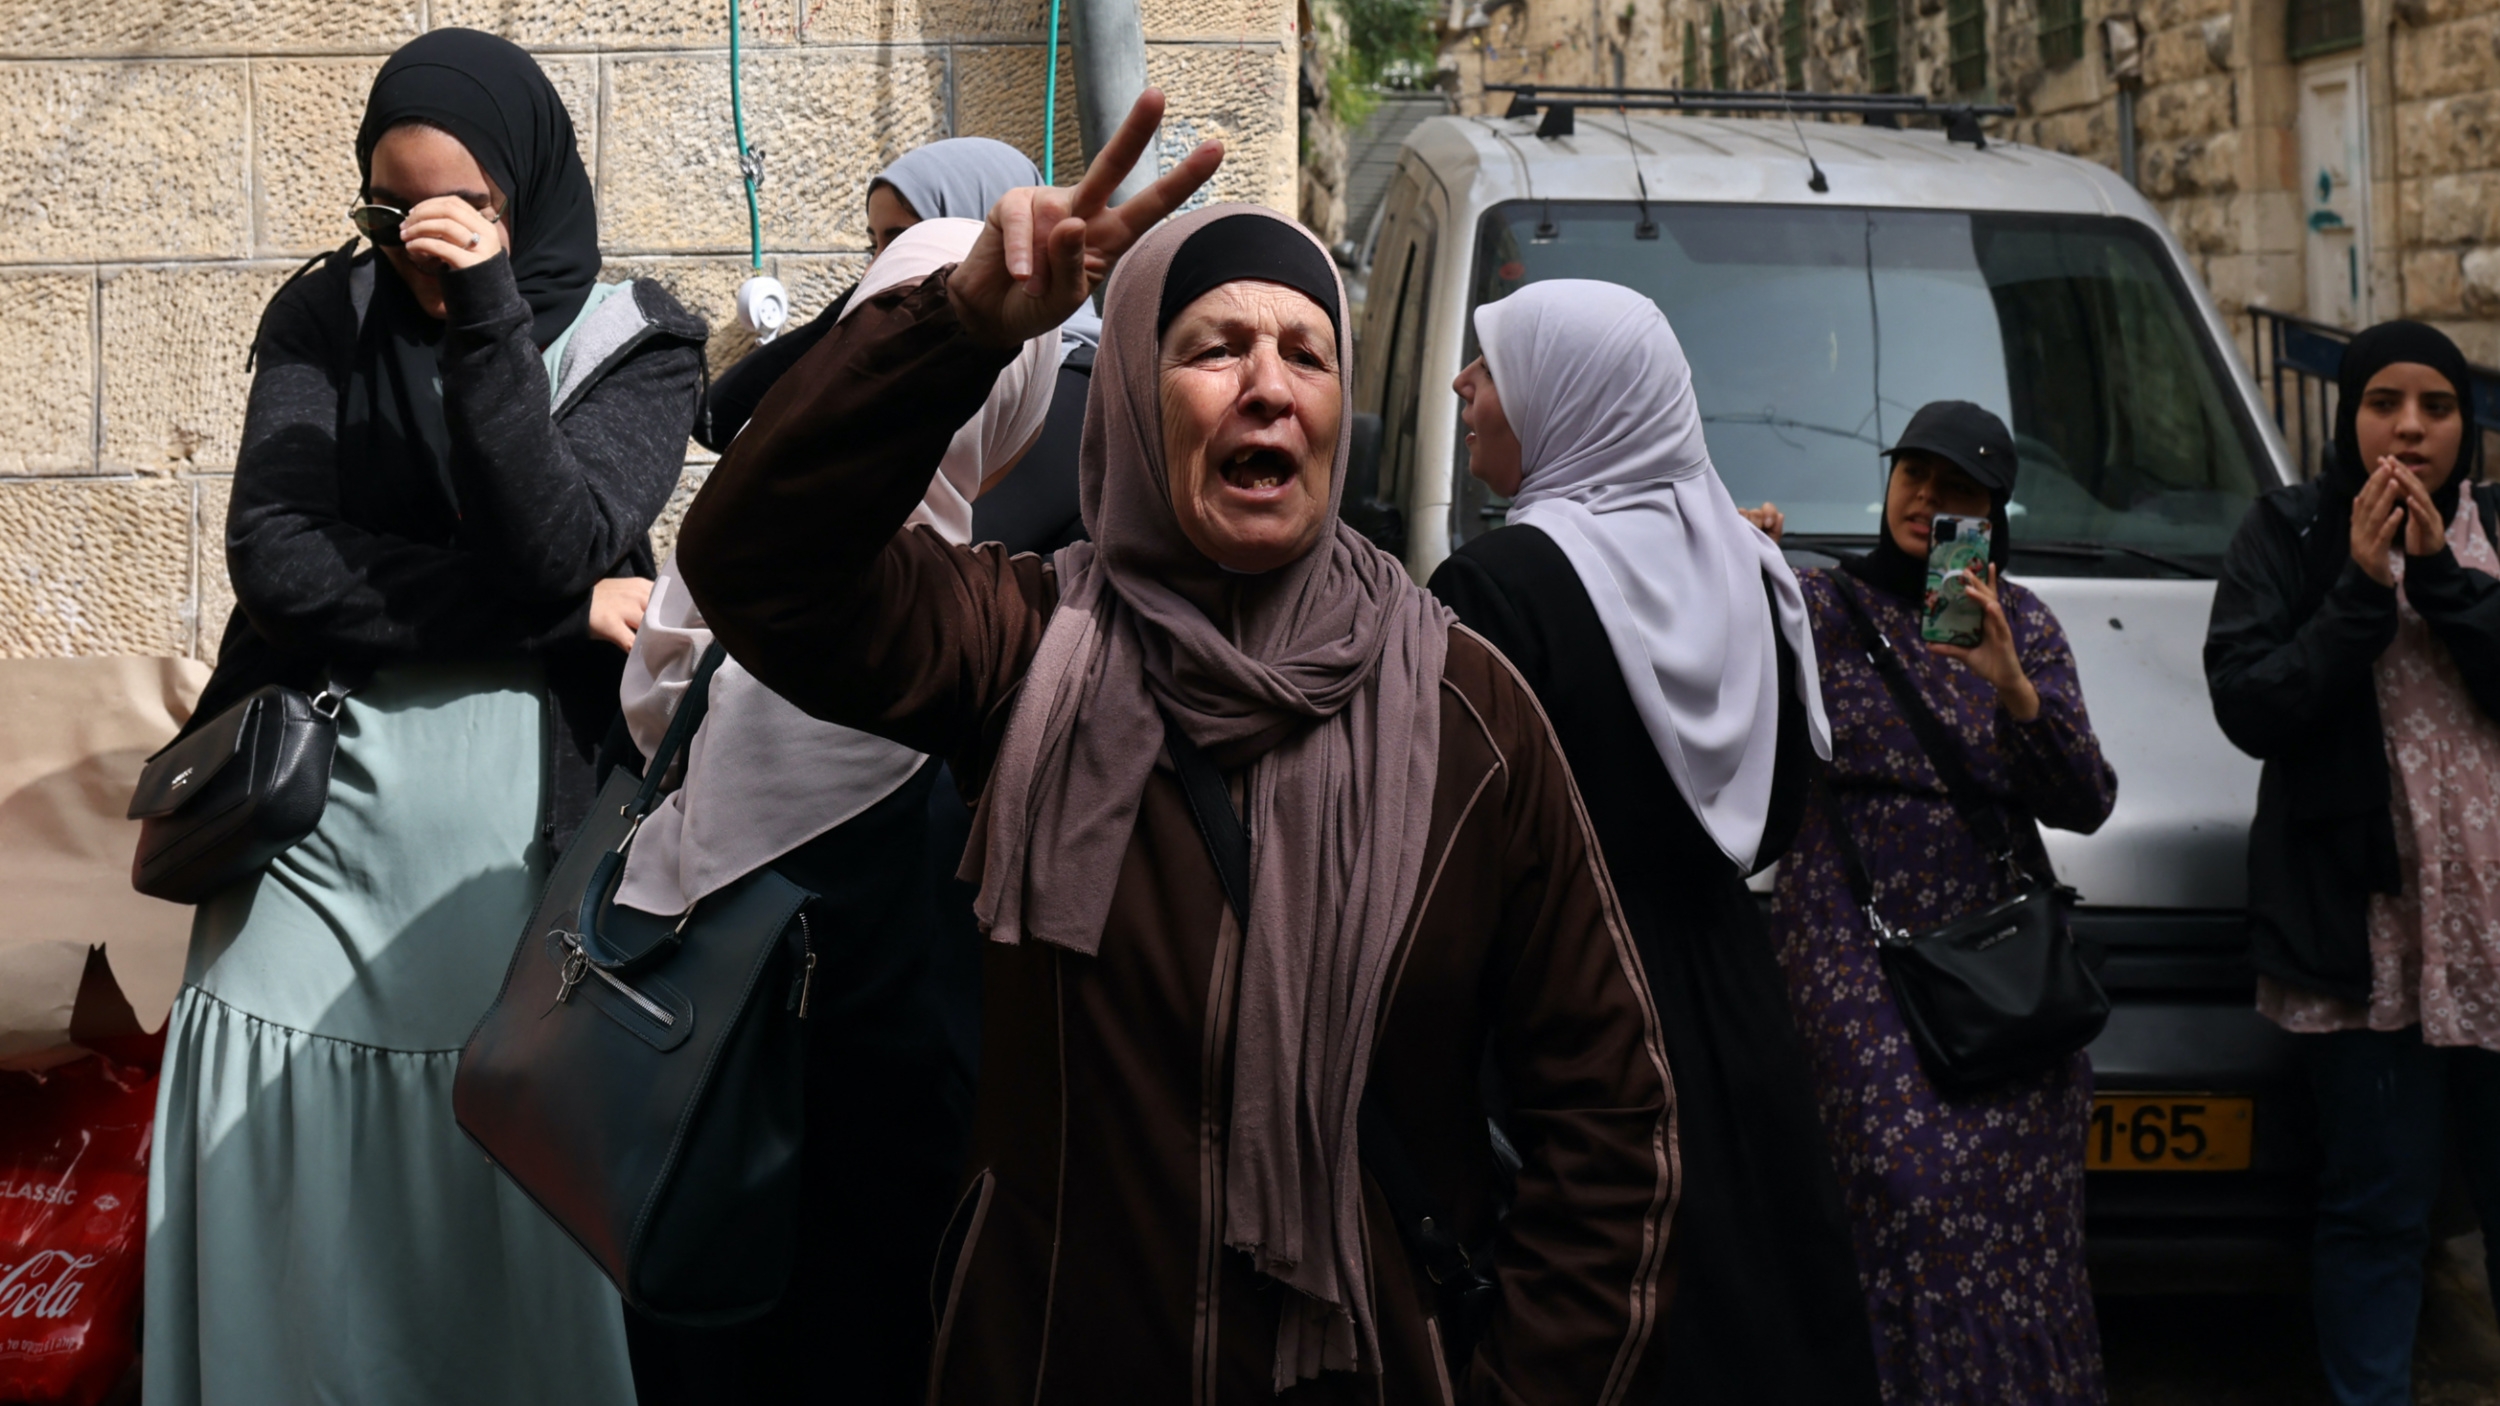 A Palestinian woman reacts as Israeli border police (unseen) patrol the area in front of the Lion's Gate in Jerusalem's Old City, on 17 April 2022 (AFP)